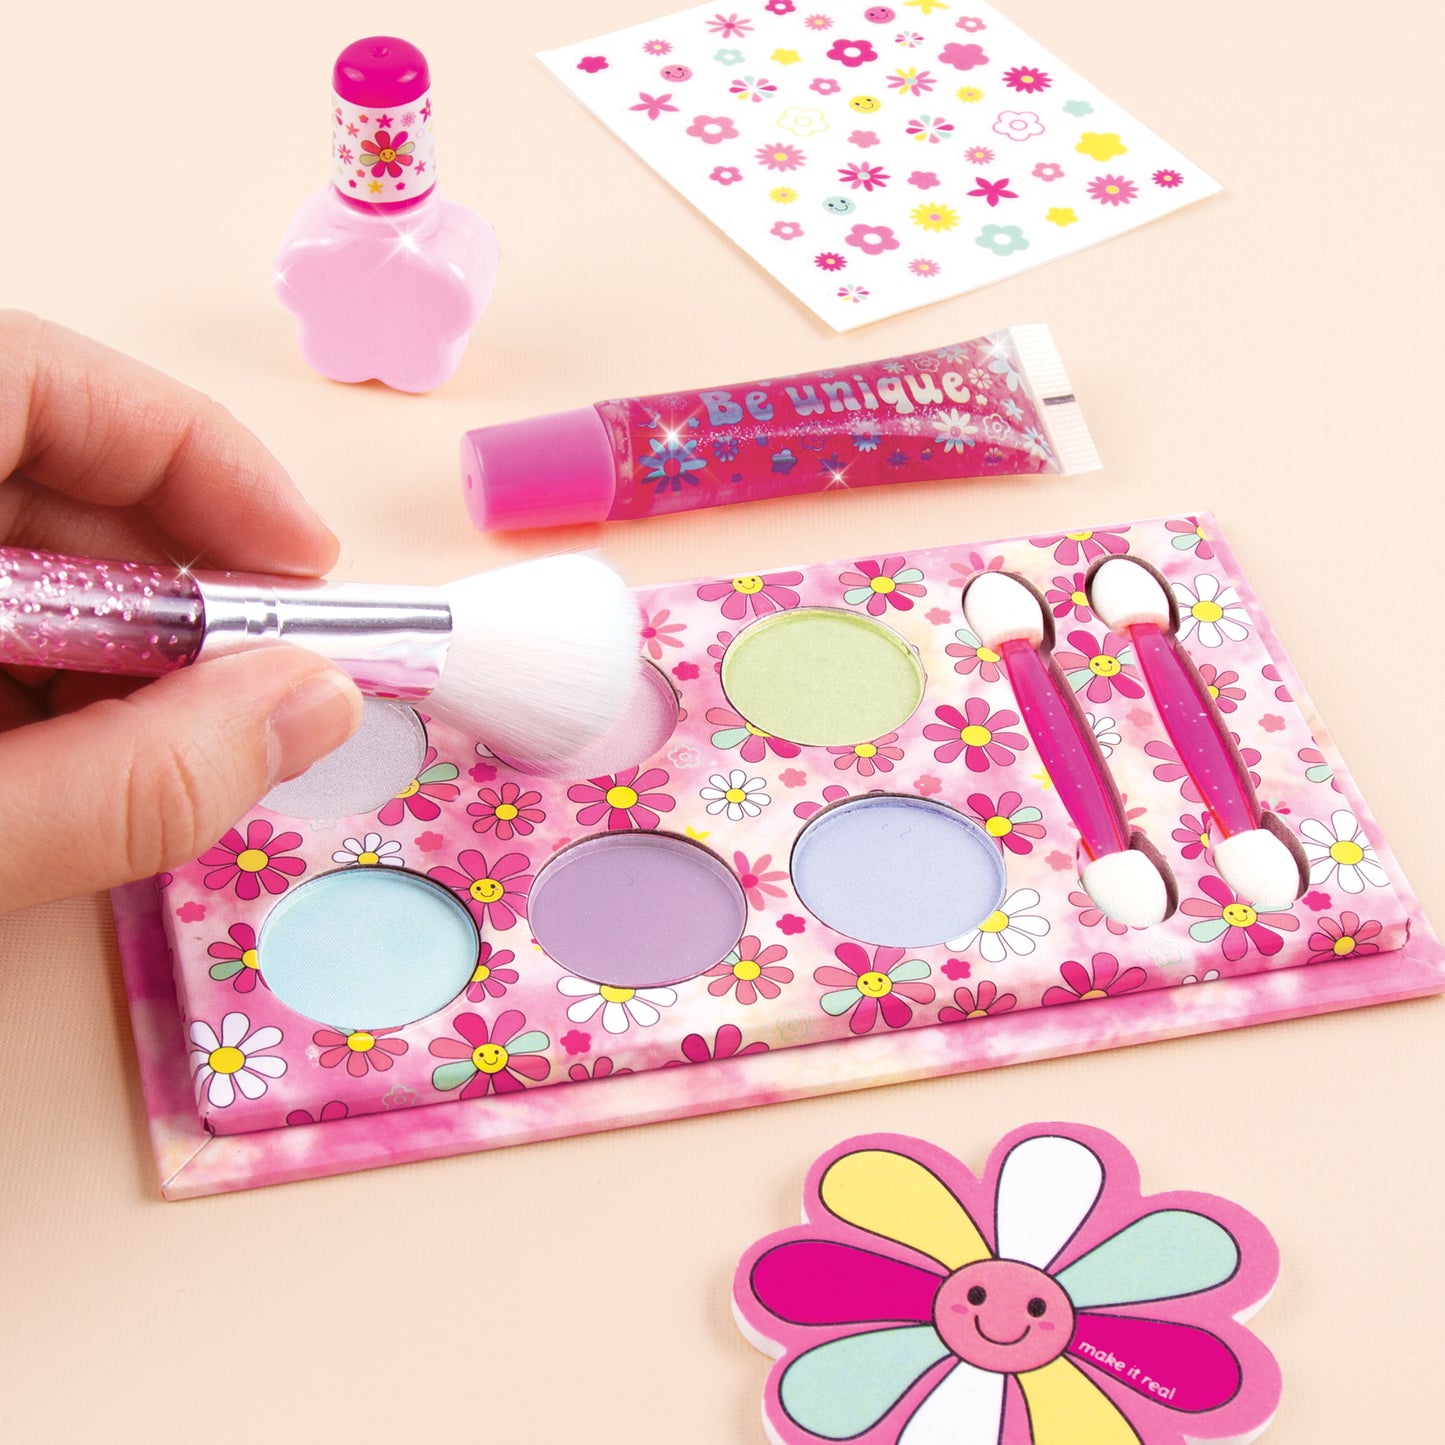 Blooming Beauty Cosmetic Set